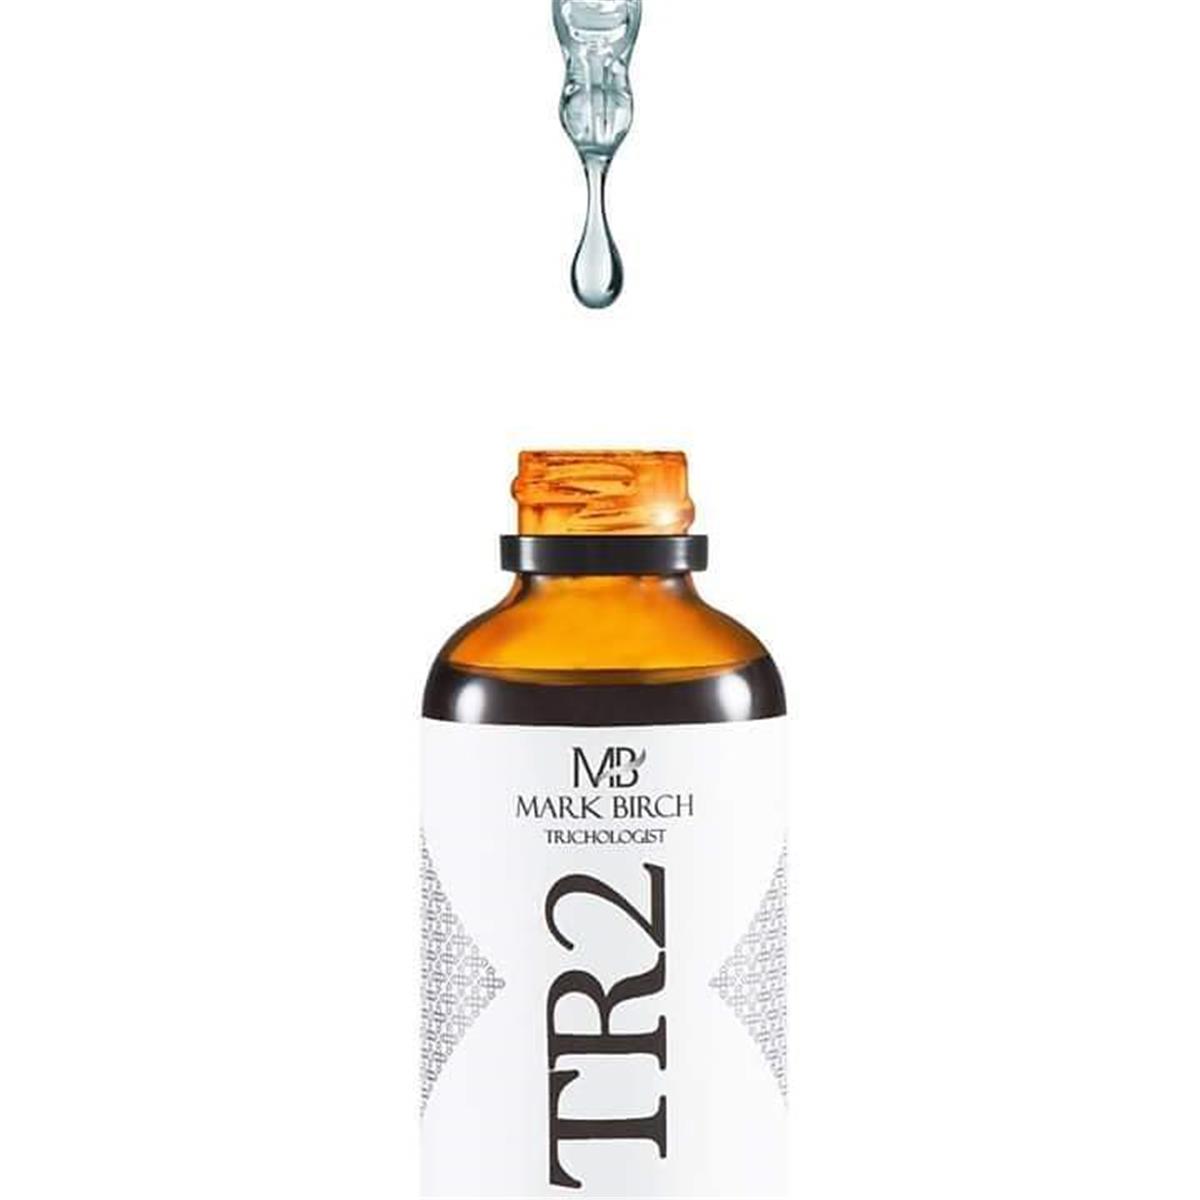 TR2 Scalp Therapy Lotion 